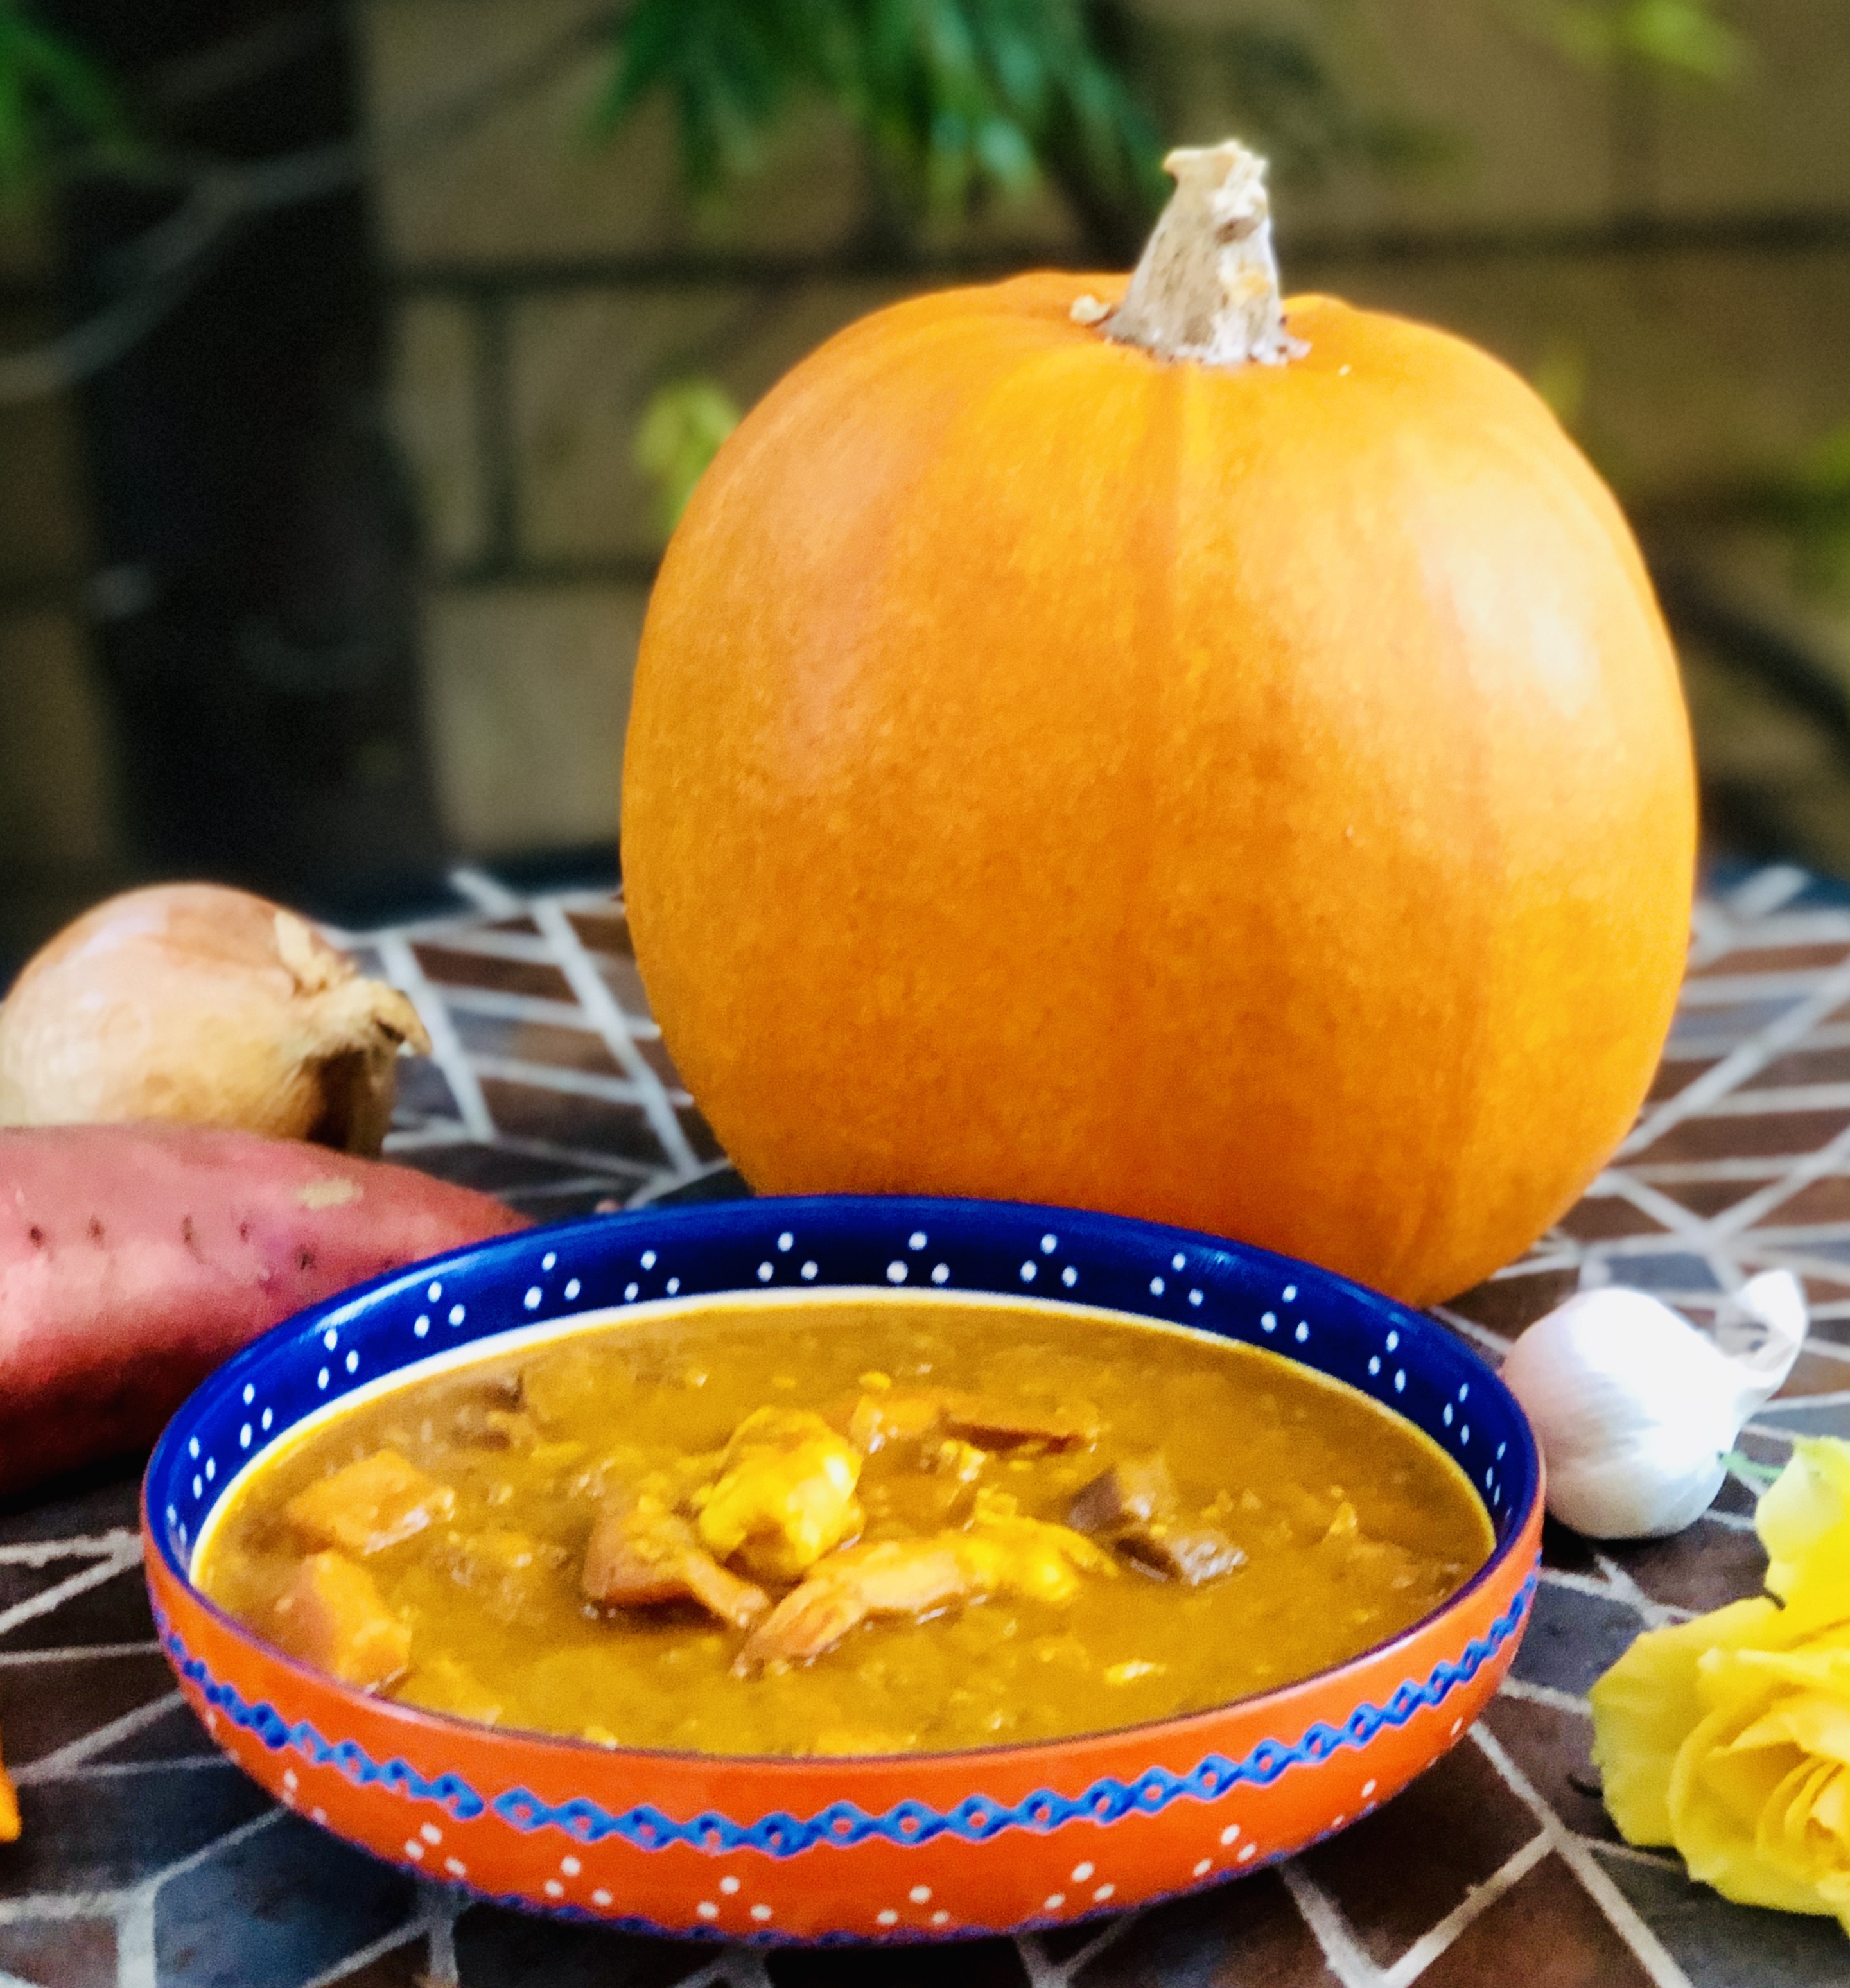 Bowl of orange curry on an outdoor table with a large orange pumpkin, purple sweet potato, onion, head of garlic, yellow and yellow rose